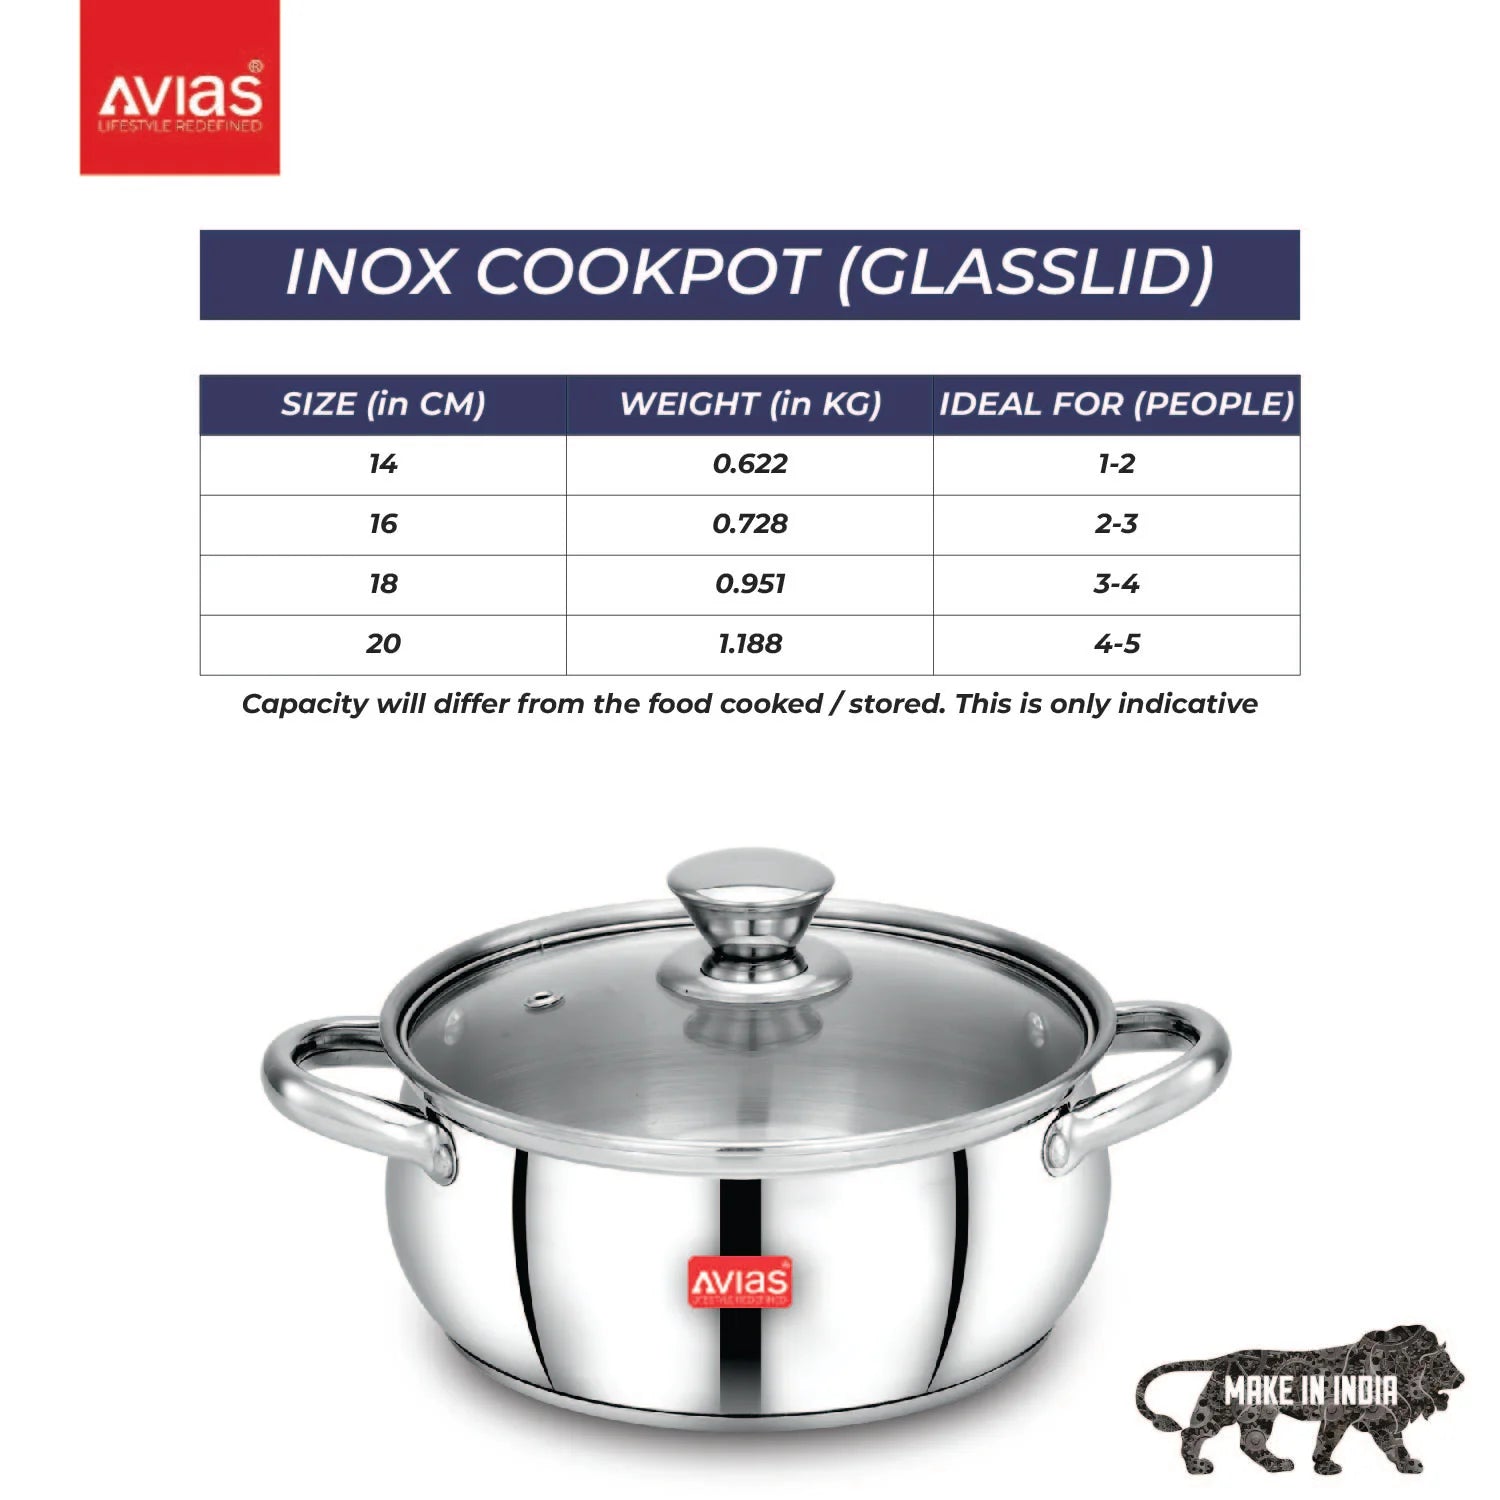 AVIAS Inox IB stainless steel cookpot with glass lid with steam vent | rust-resistant cooware with sandwich bottom | Induction and gas stove friendly | Silver